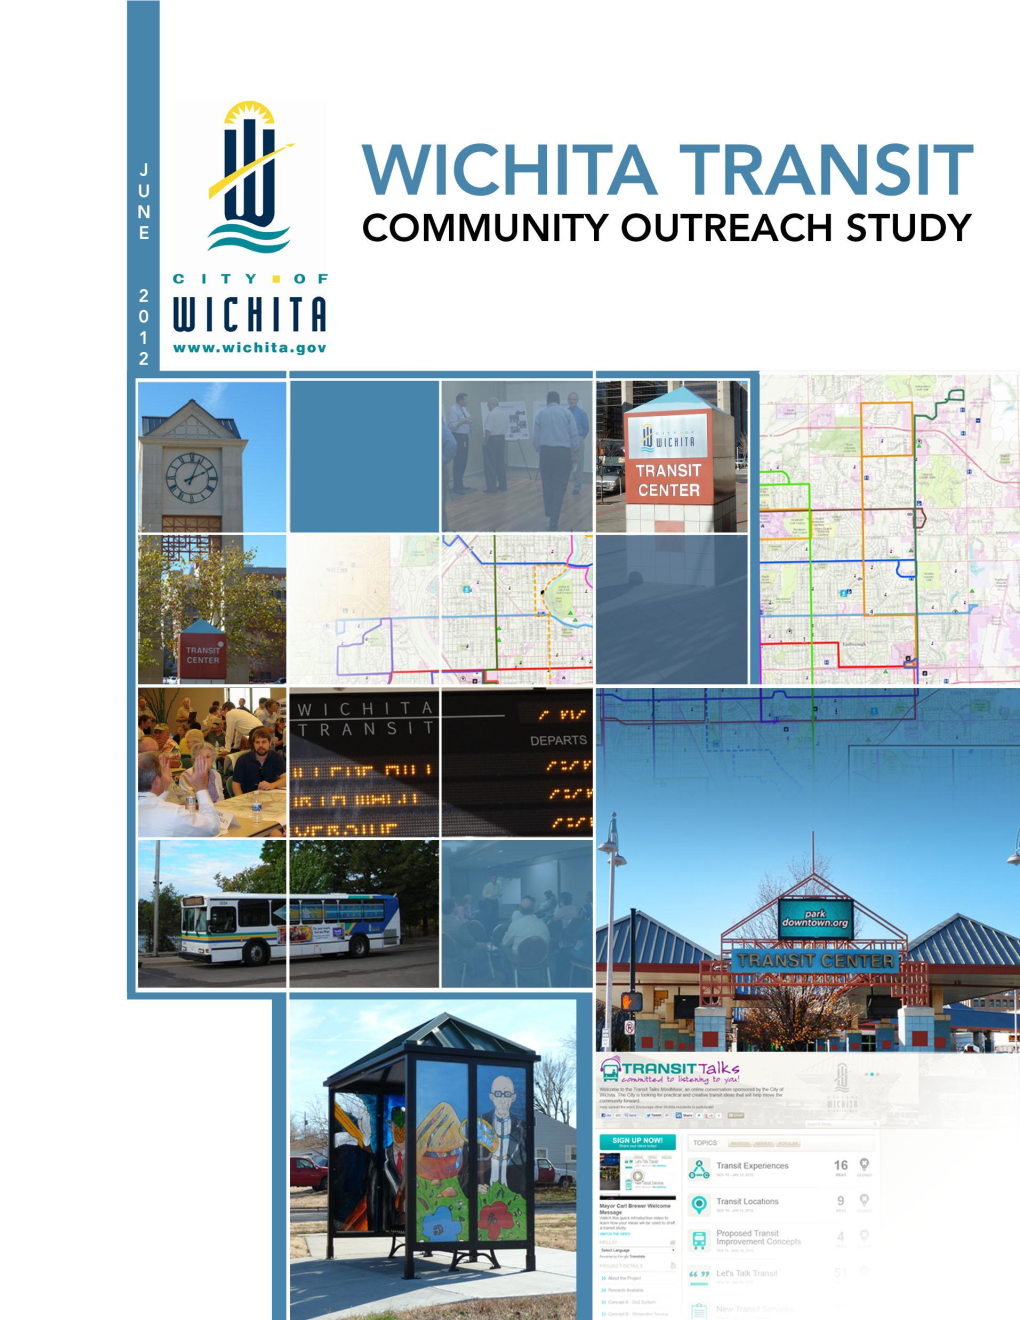 Wichita Transit Community Outreach Study Was Conducted with the Guidance, Support, and Participation of the Following People